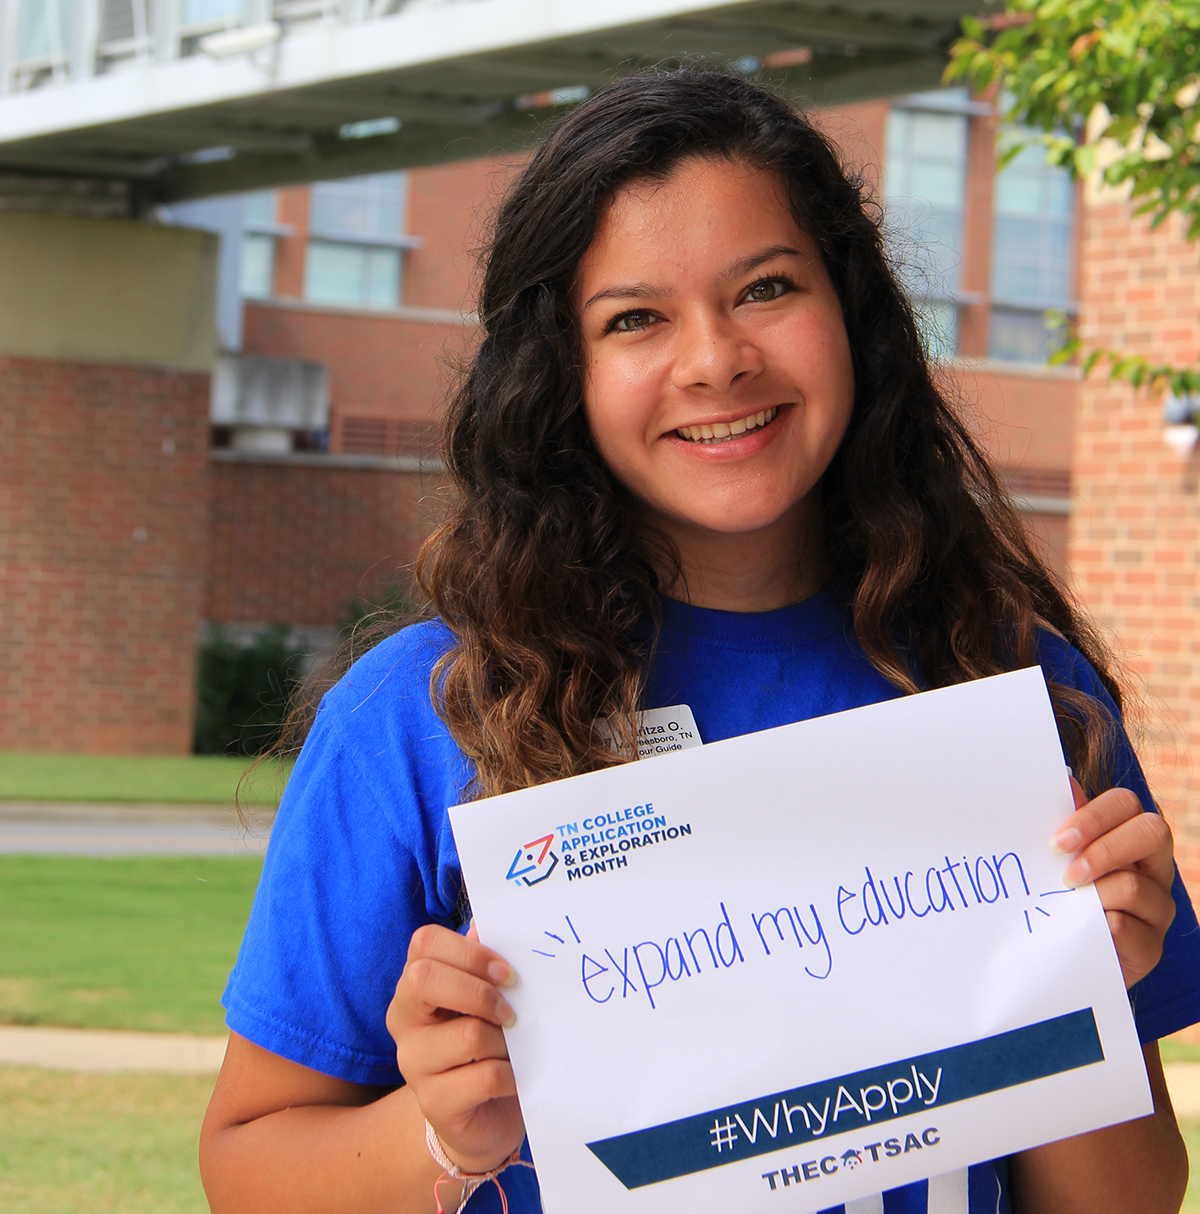 Maritza Oceguera, an MTSU junior business management major from Murfreesboro, promotes the #WhyApply effort during the fall college application season. MTSU will waive application fees until 11:55 p.m. Sunday, Sept. 26. (MTSU photo by Katie Roberts)